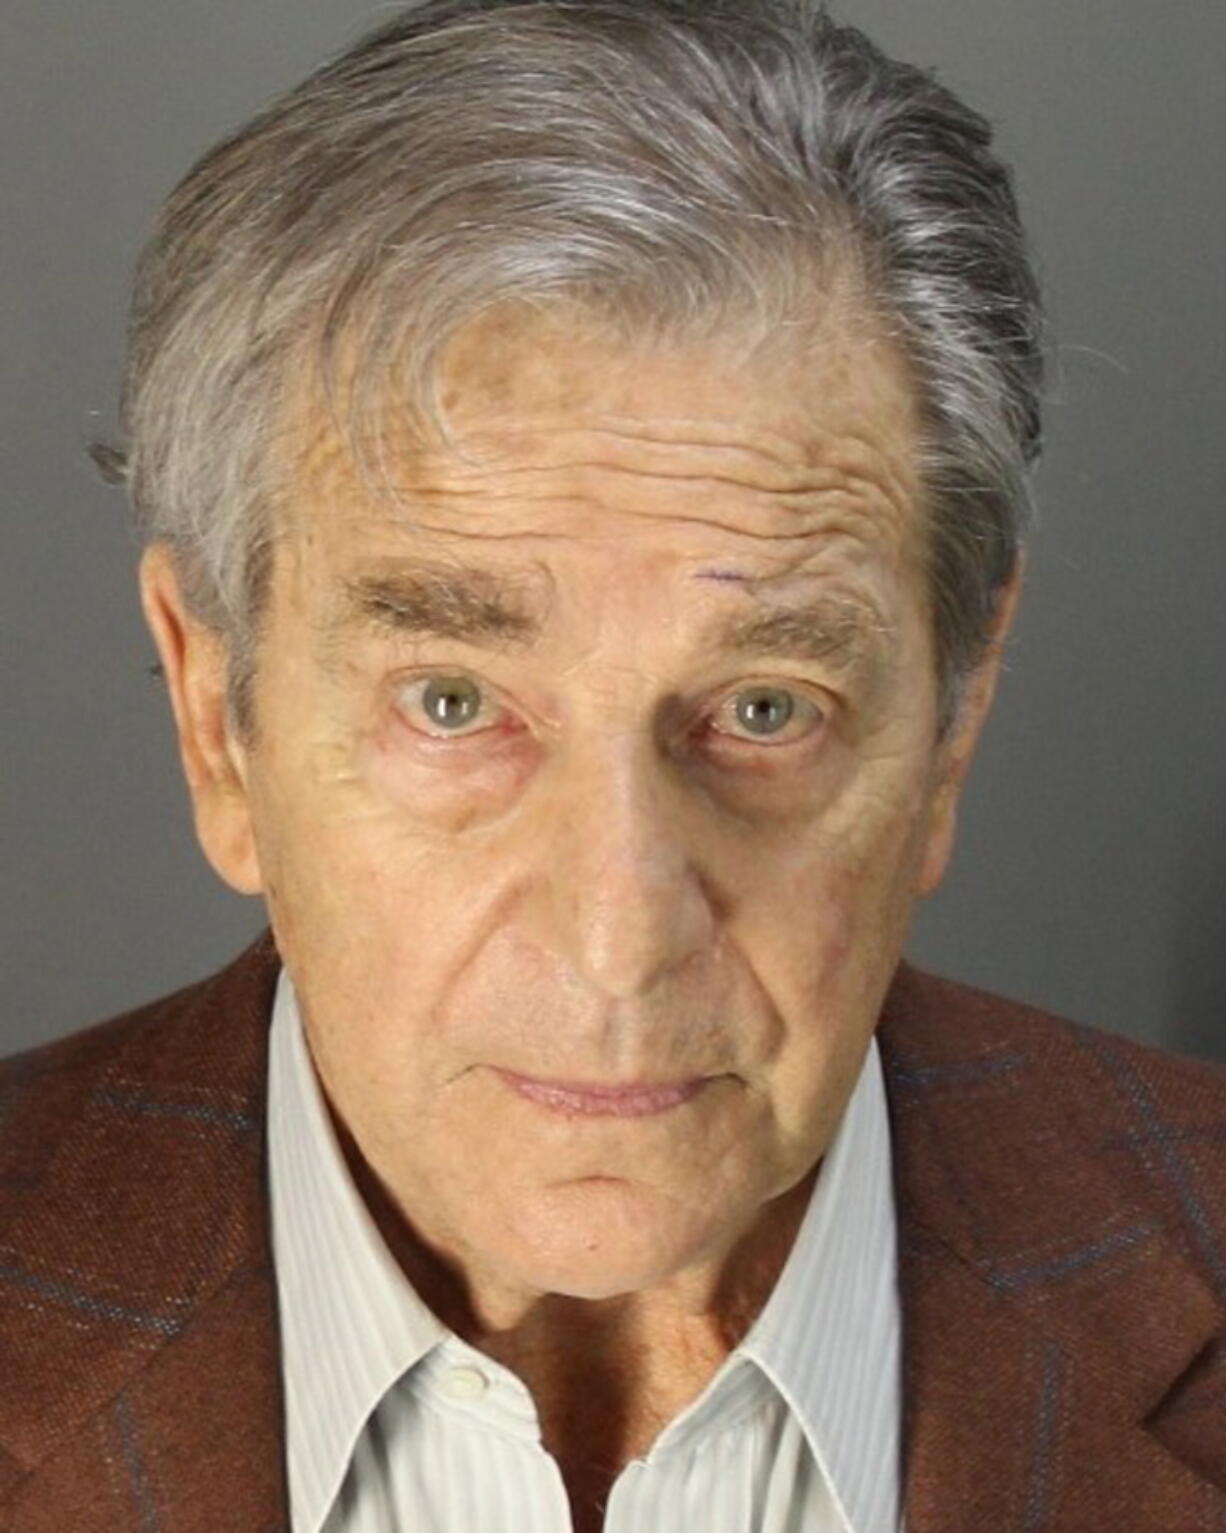 FILE - This booking photo provided by the Napa County Sheriff's Office shows Paul Pelosi on May 29, 2022, following his arrest on suspicion of DUI in Northern California. Pelosi, the 82-year-old husband of Speaker of the House Nancy Pelosi, was charged, Thursday, June 23, 2022, with driving under the influence.